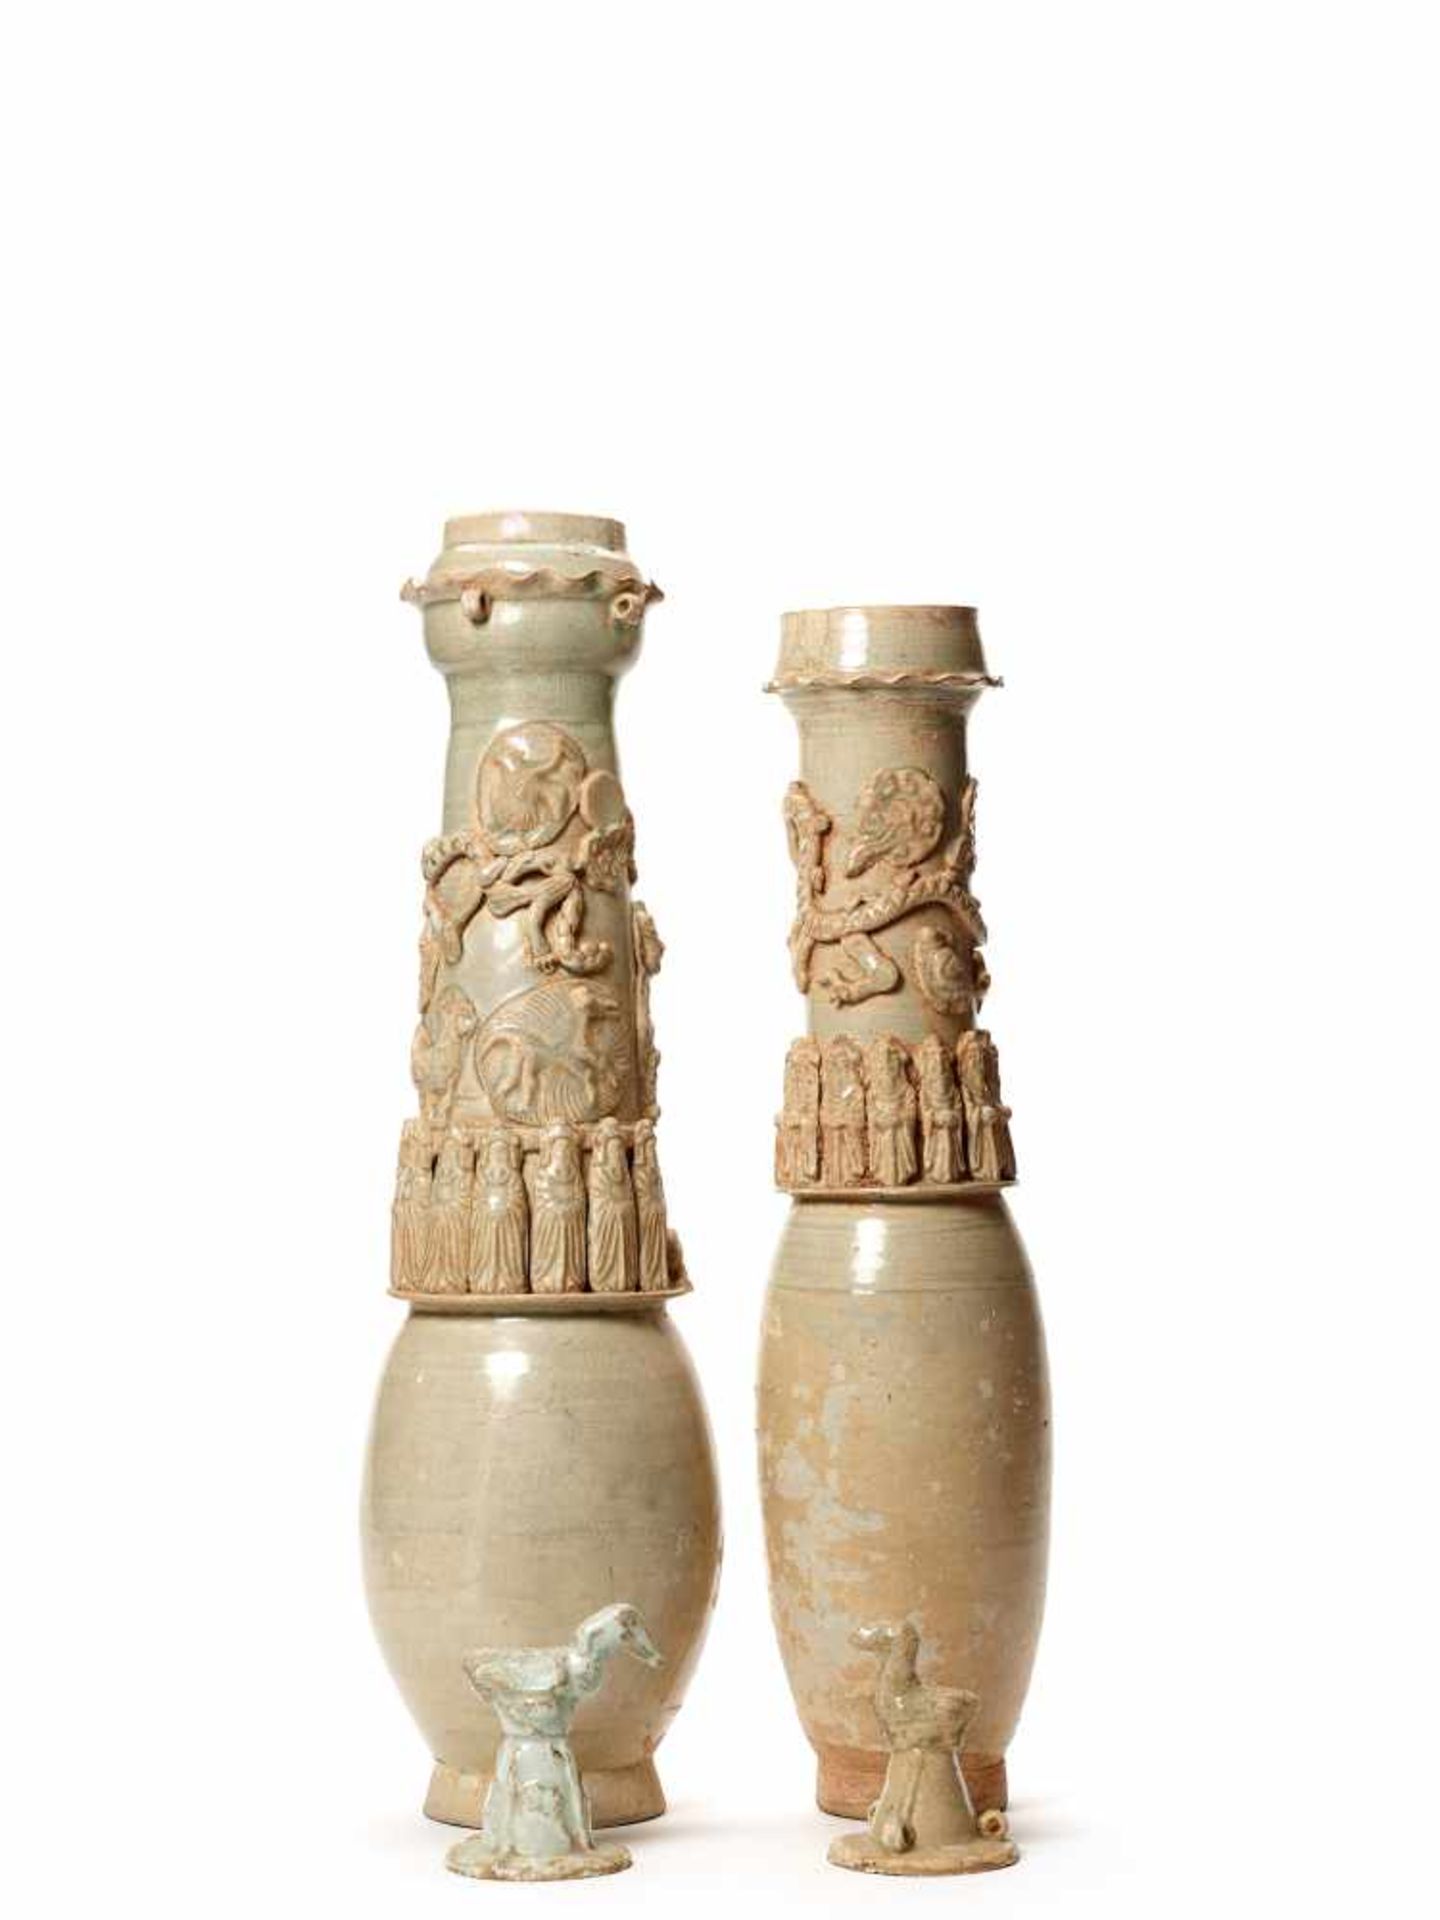 A PAIR OF LARGE CELADON-GLAZED URNS WITH COVERS, SONG DYNASTYBoth vessels with dragons, dignities - Image 4 of 4